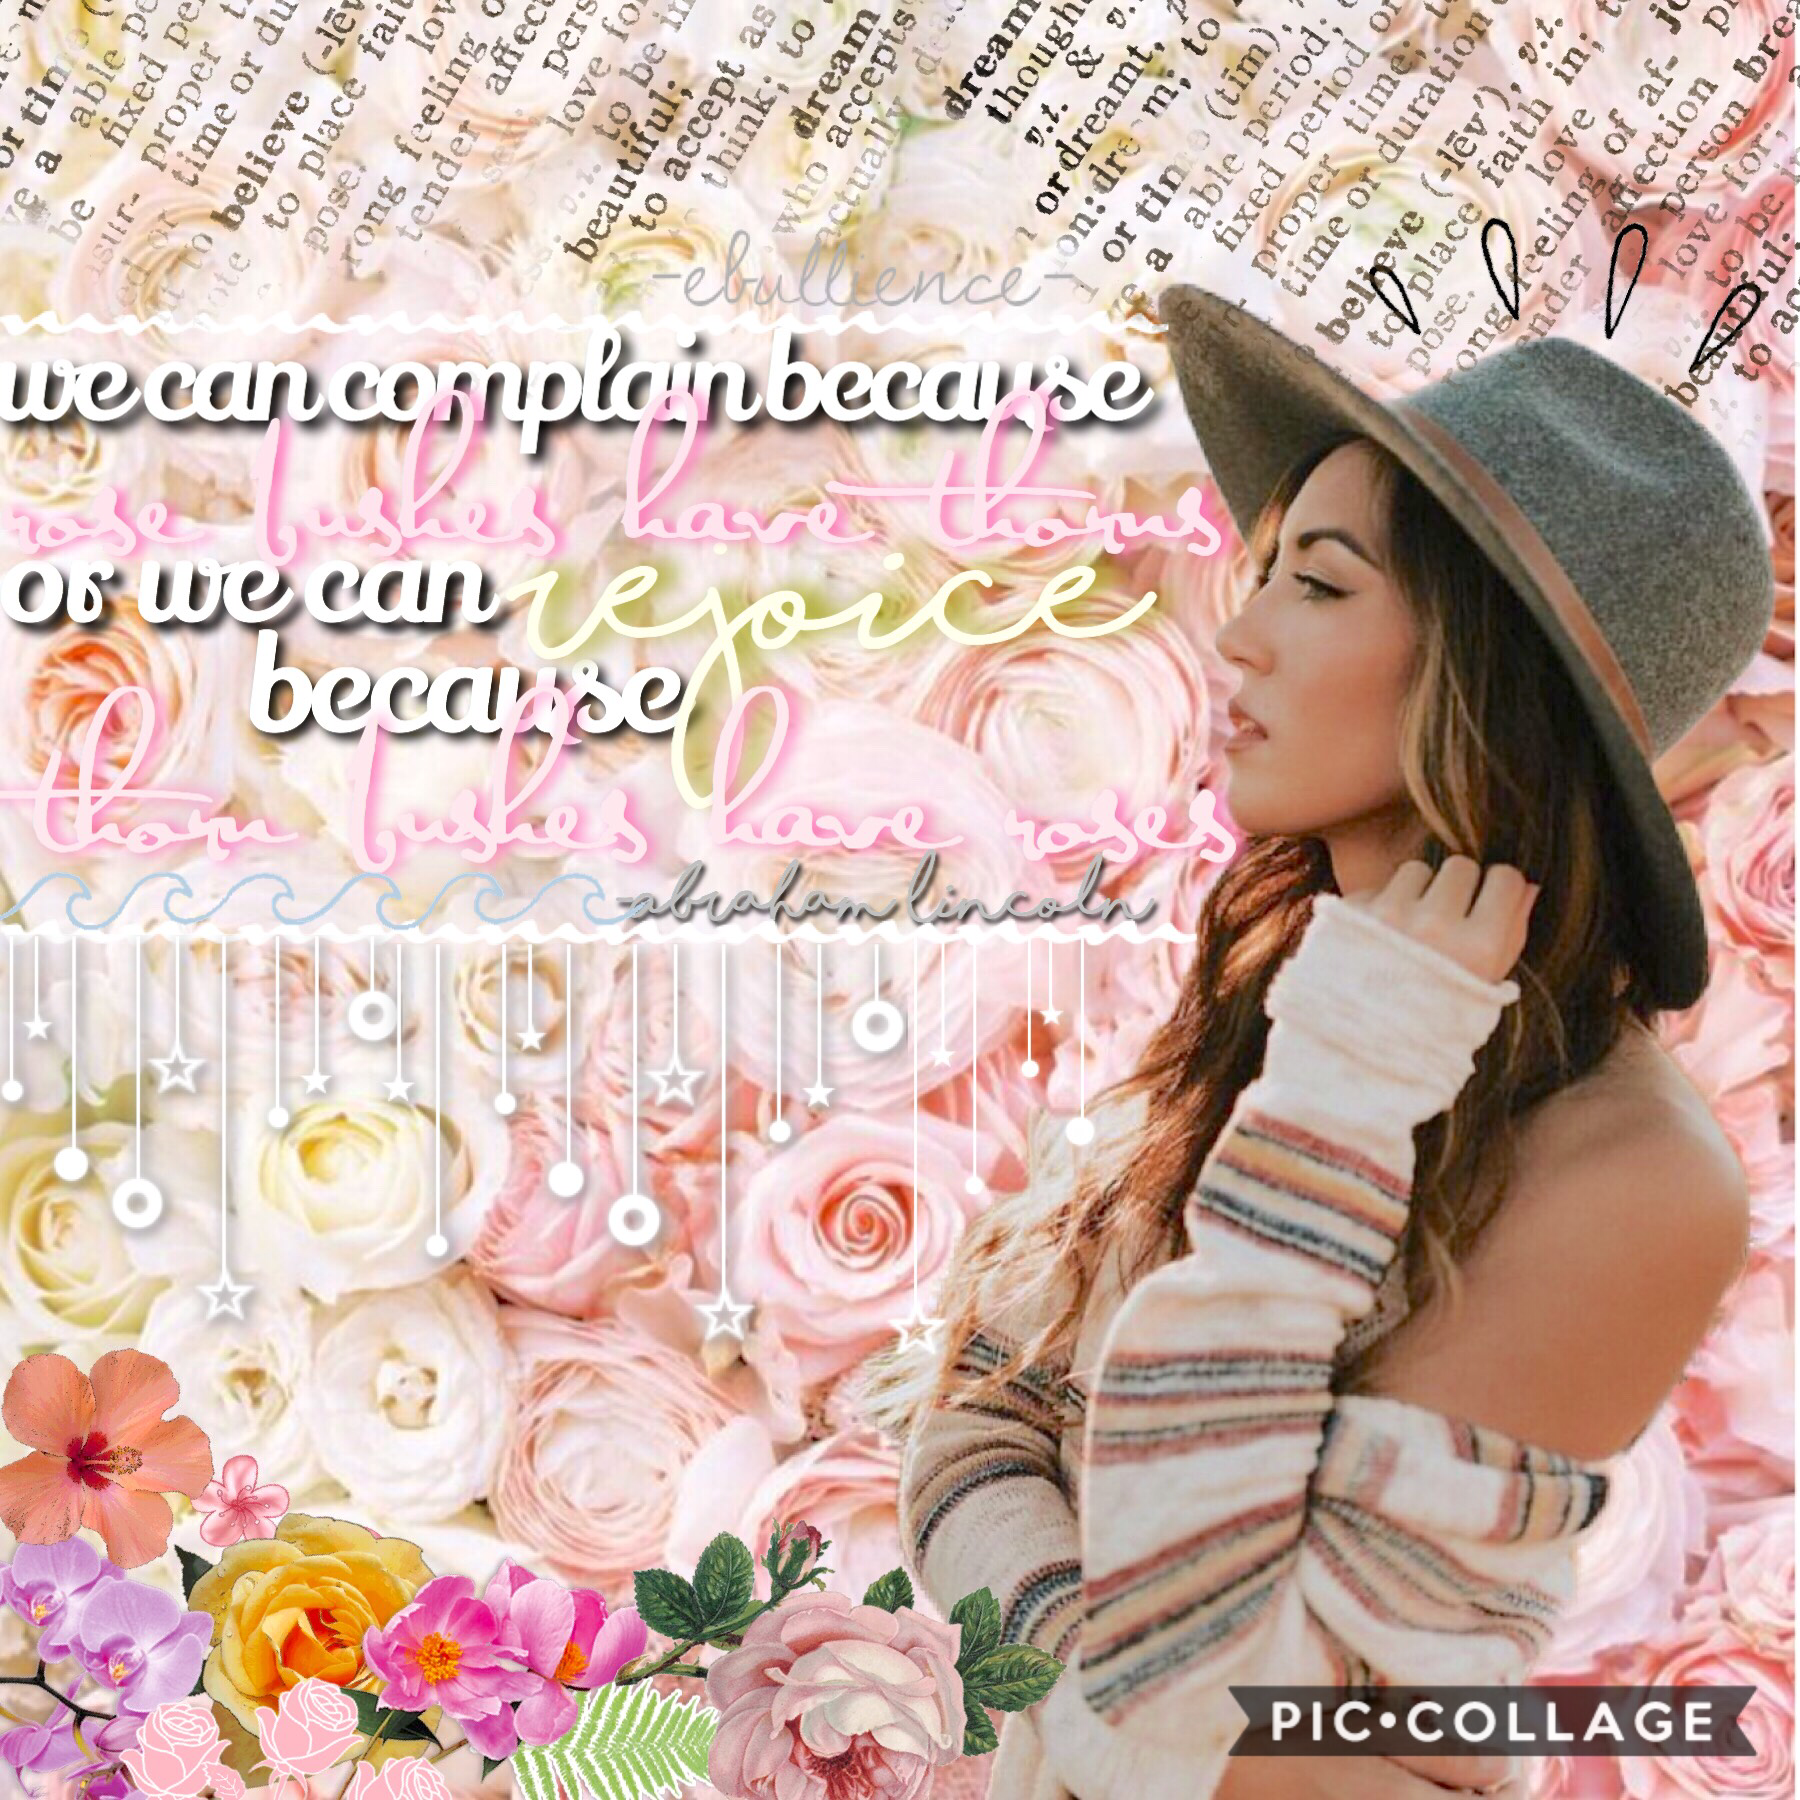 ✨tap✨
Hello lovelies! Hope you had an awesome day! In this collage I used a lot of the floral stickers from pic collage in the bottom left corner, and I love how it turned out! Let me know what you think! QOTD:favorite PC font?
AOTD:satisfaction
9/2/2018